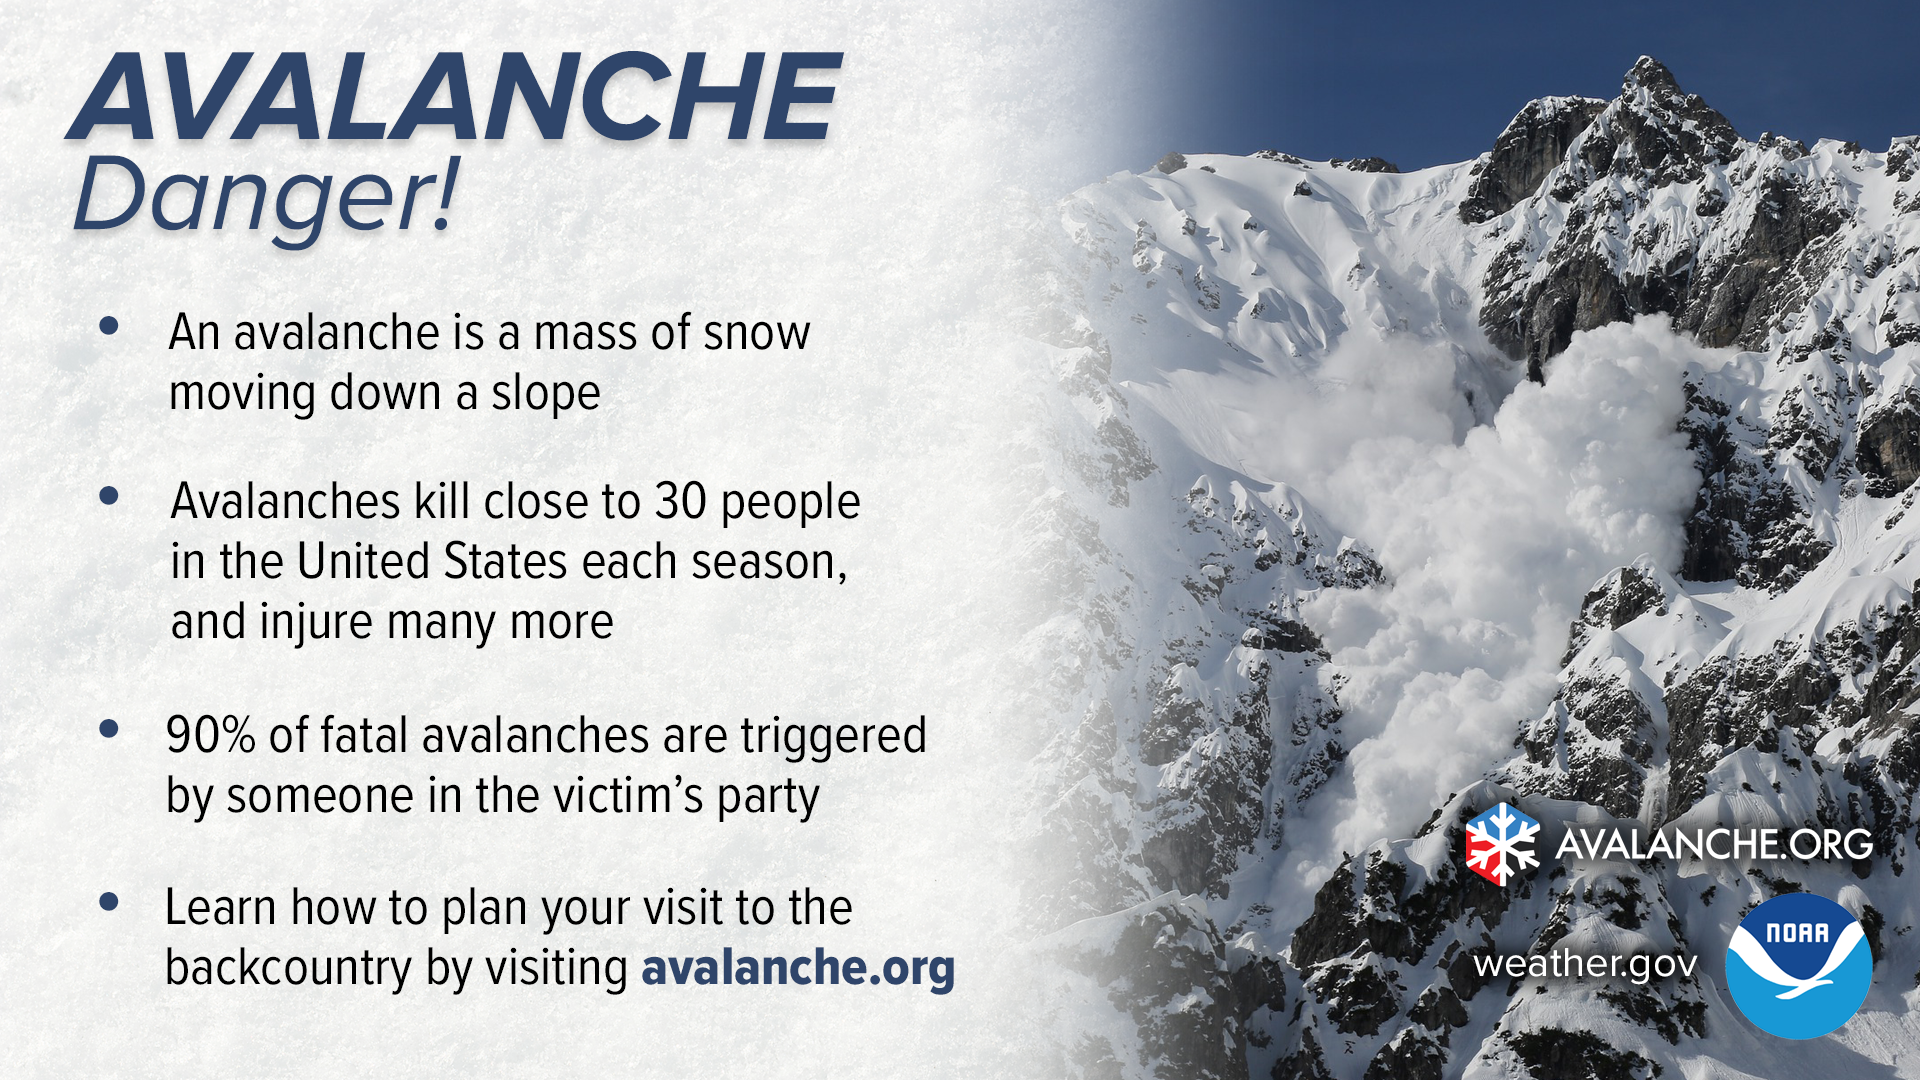 An avalanche is a mass of snow moving down a slope. Avalanches kill an average of 30 people in the United States each season, and injure many more. 90% of fatal avalanches are triggered by someone in the victim's party. Learn how to plan your visit to the backcountry by visiting avalanche.org